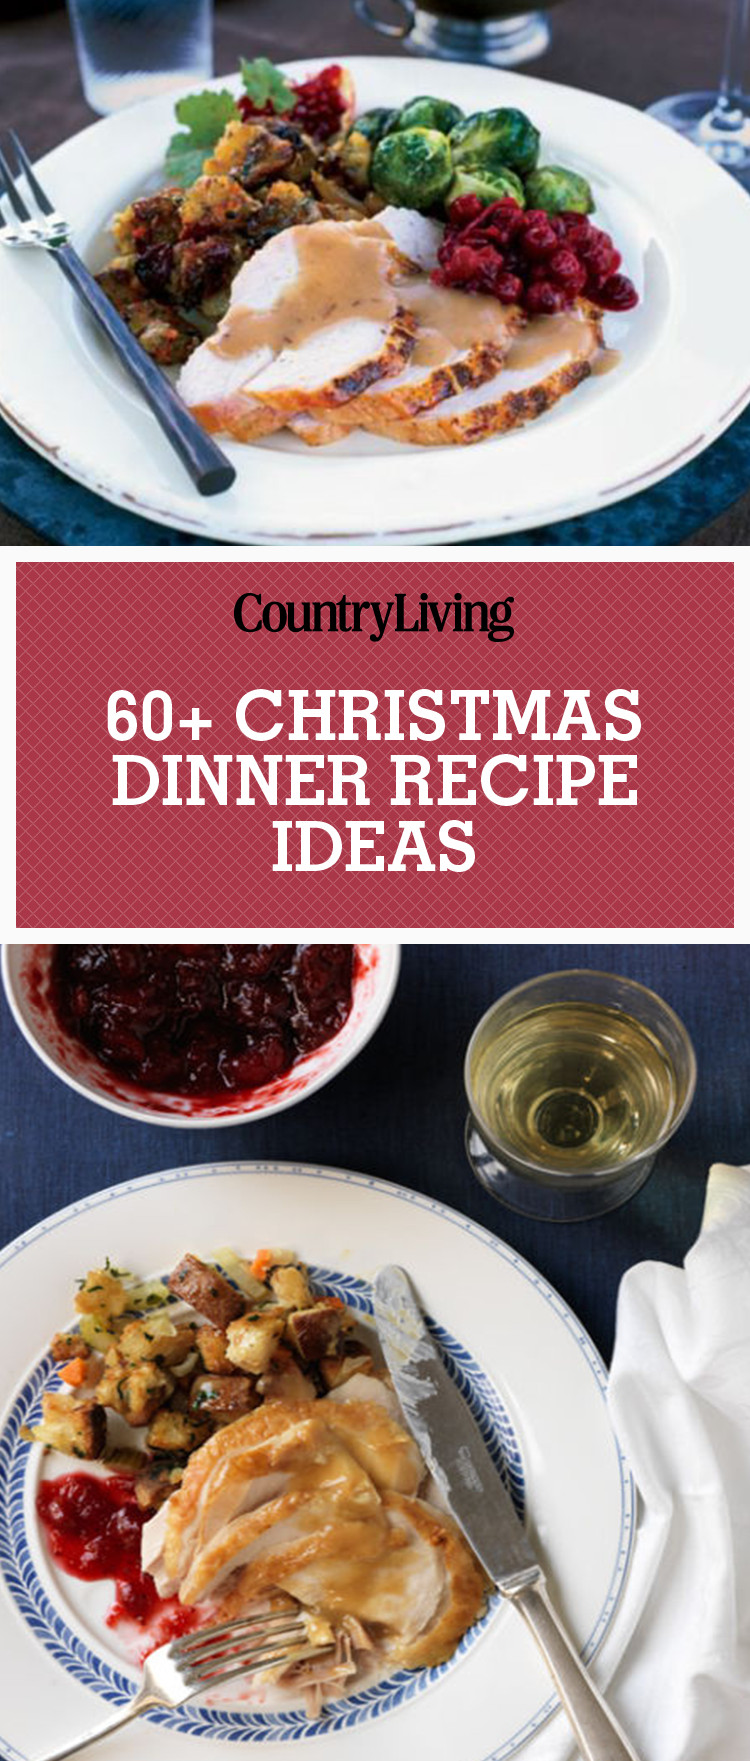 Recipes For Christmas Dinners
 70 Easy Christmas Dinner Ideas Best Holiday Meal Recipes